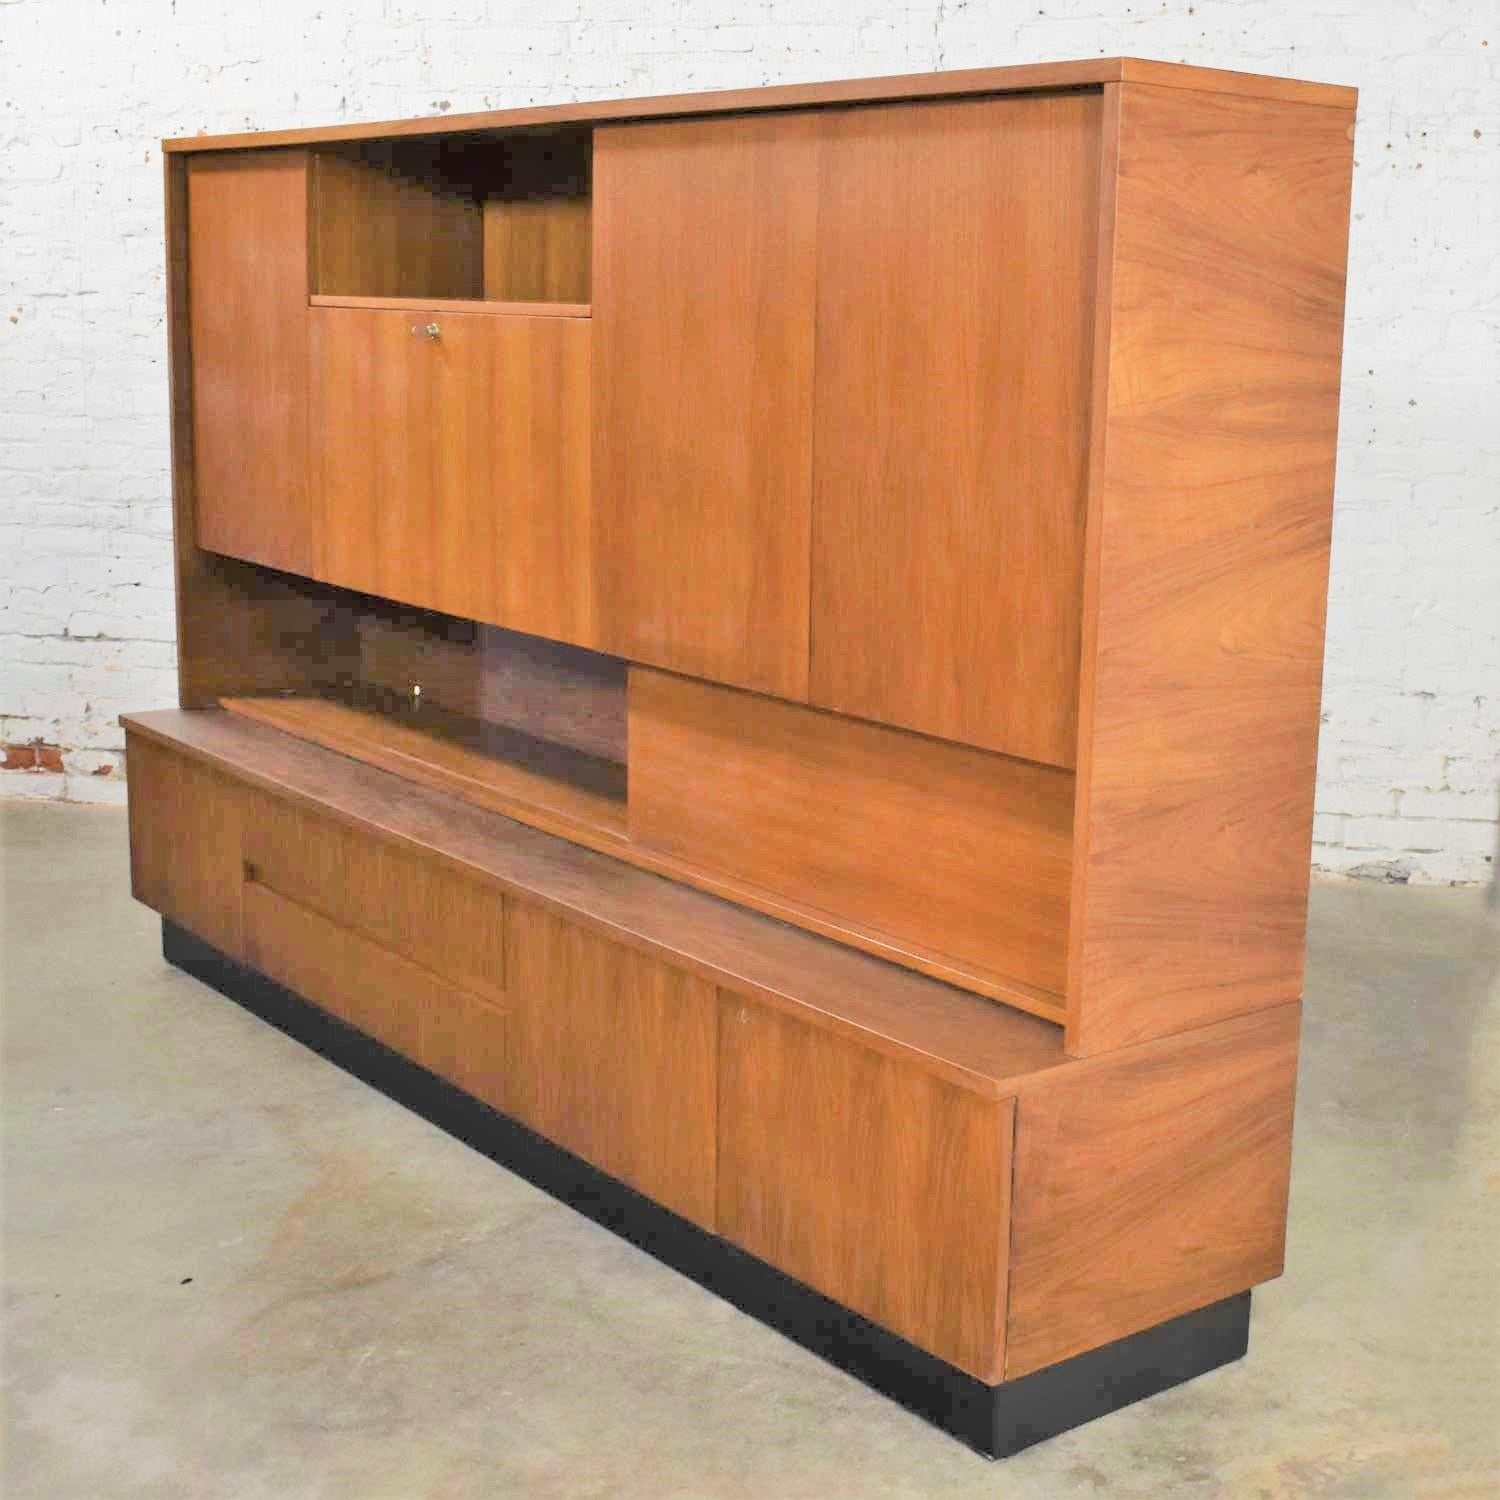 Teak Mid-Century Modern Wall Storage Bookcase Cabinet with Drop Front Desk For Sale 1